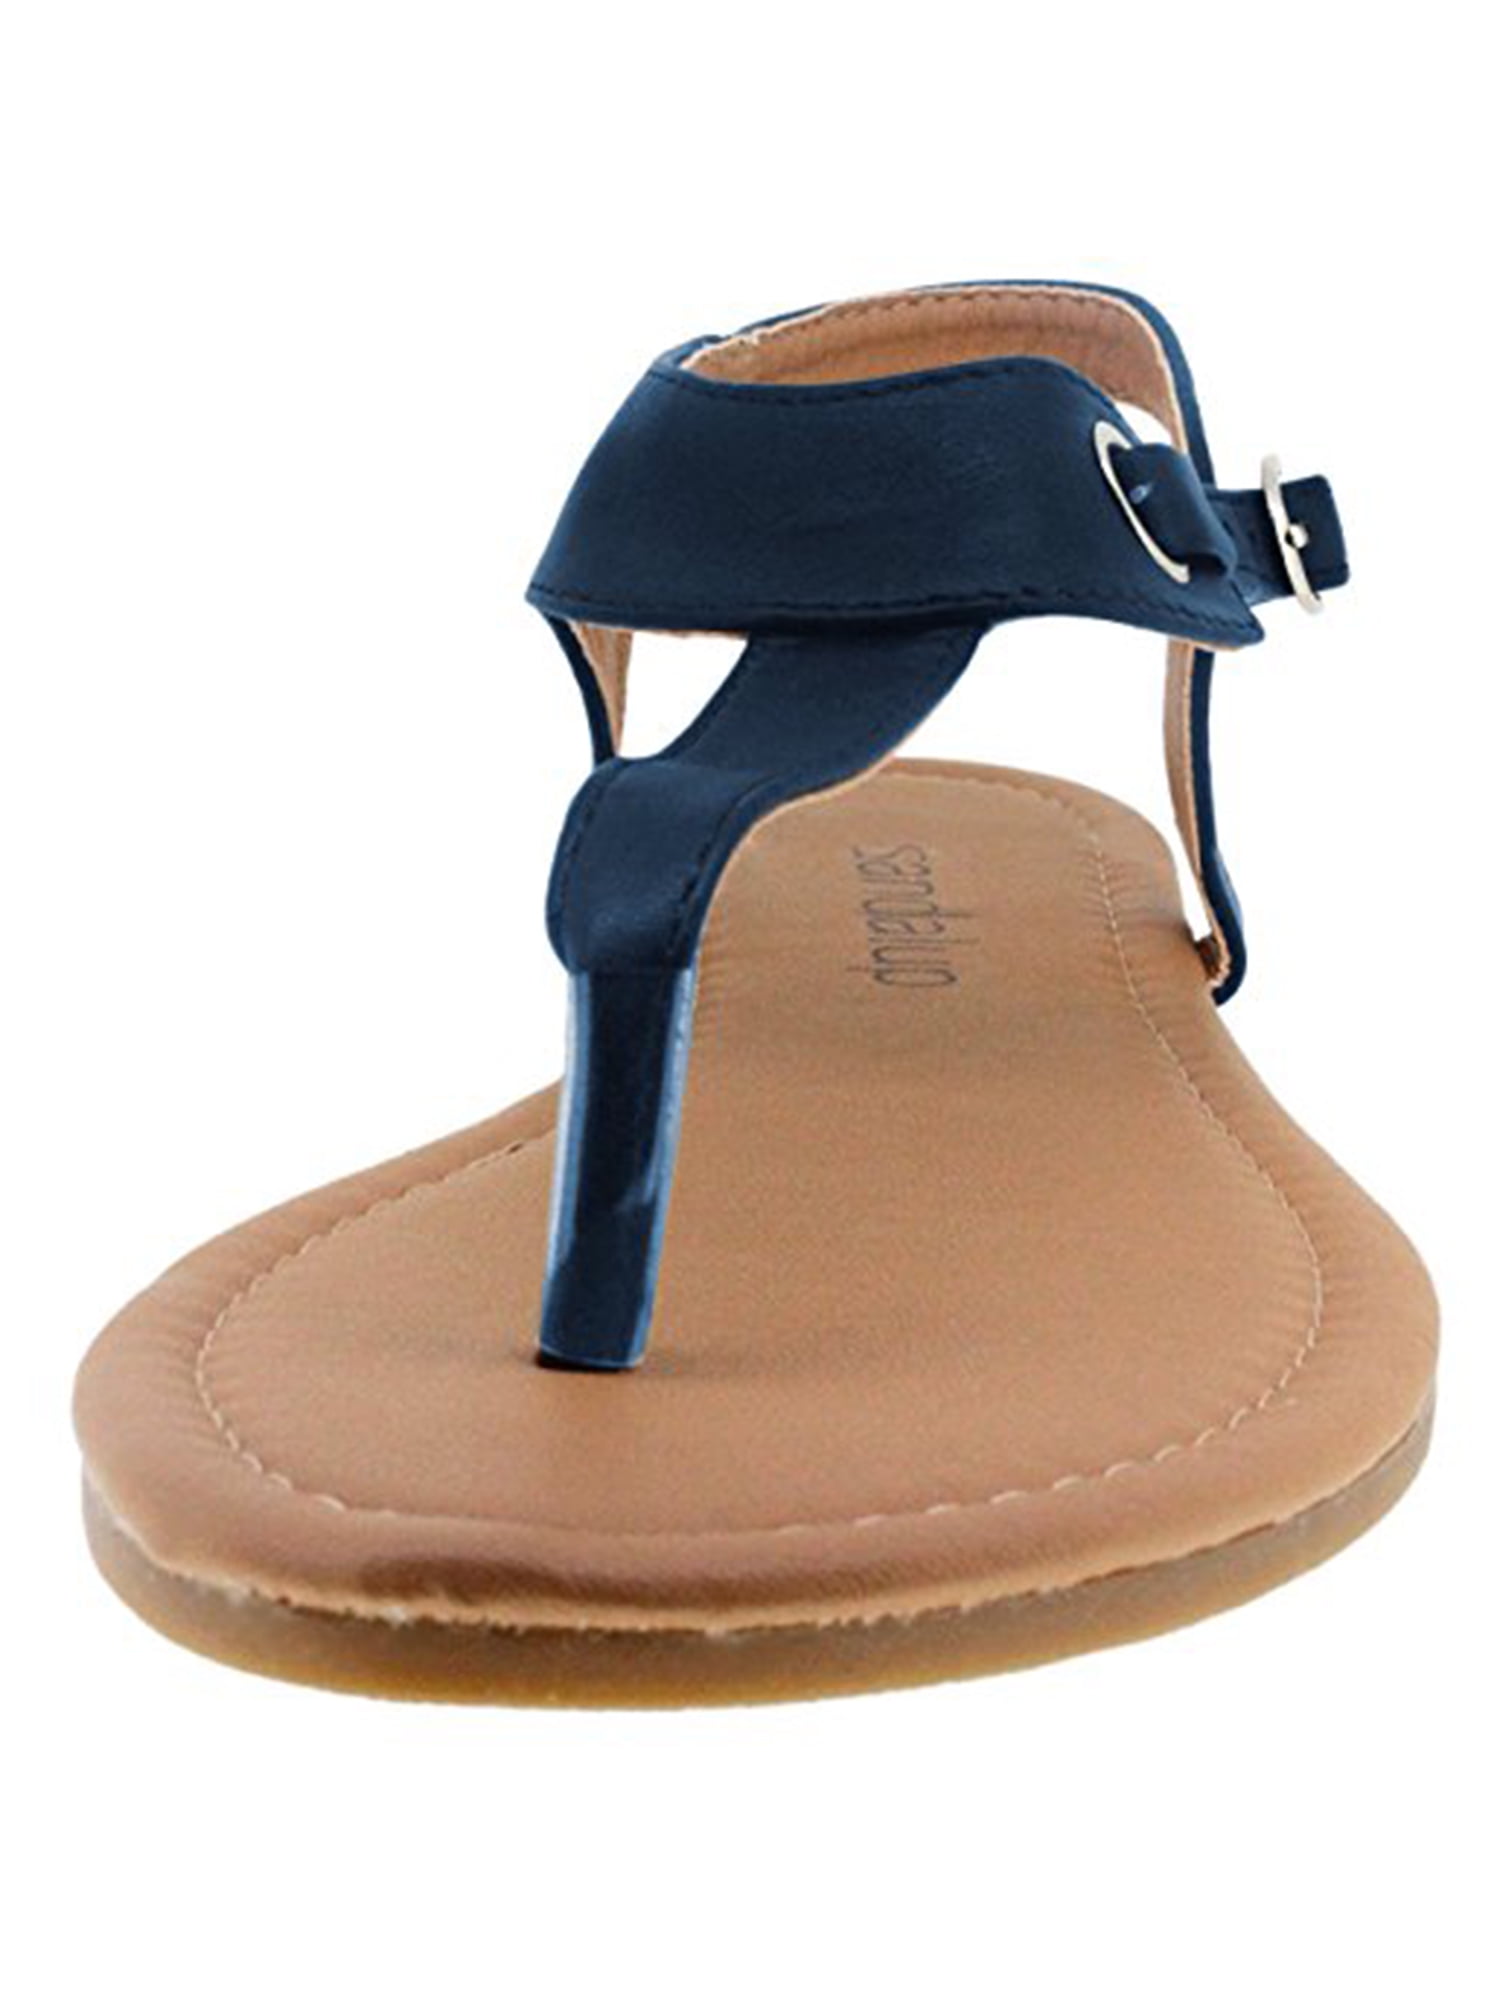 SANDALUP Women's Thong Flat Sandals T-Strap Summer Shoes with Buckle 